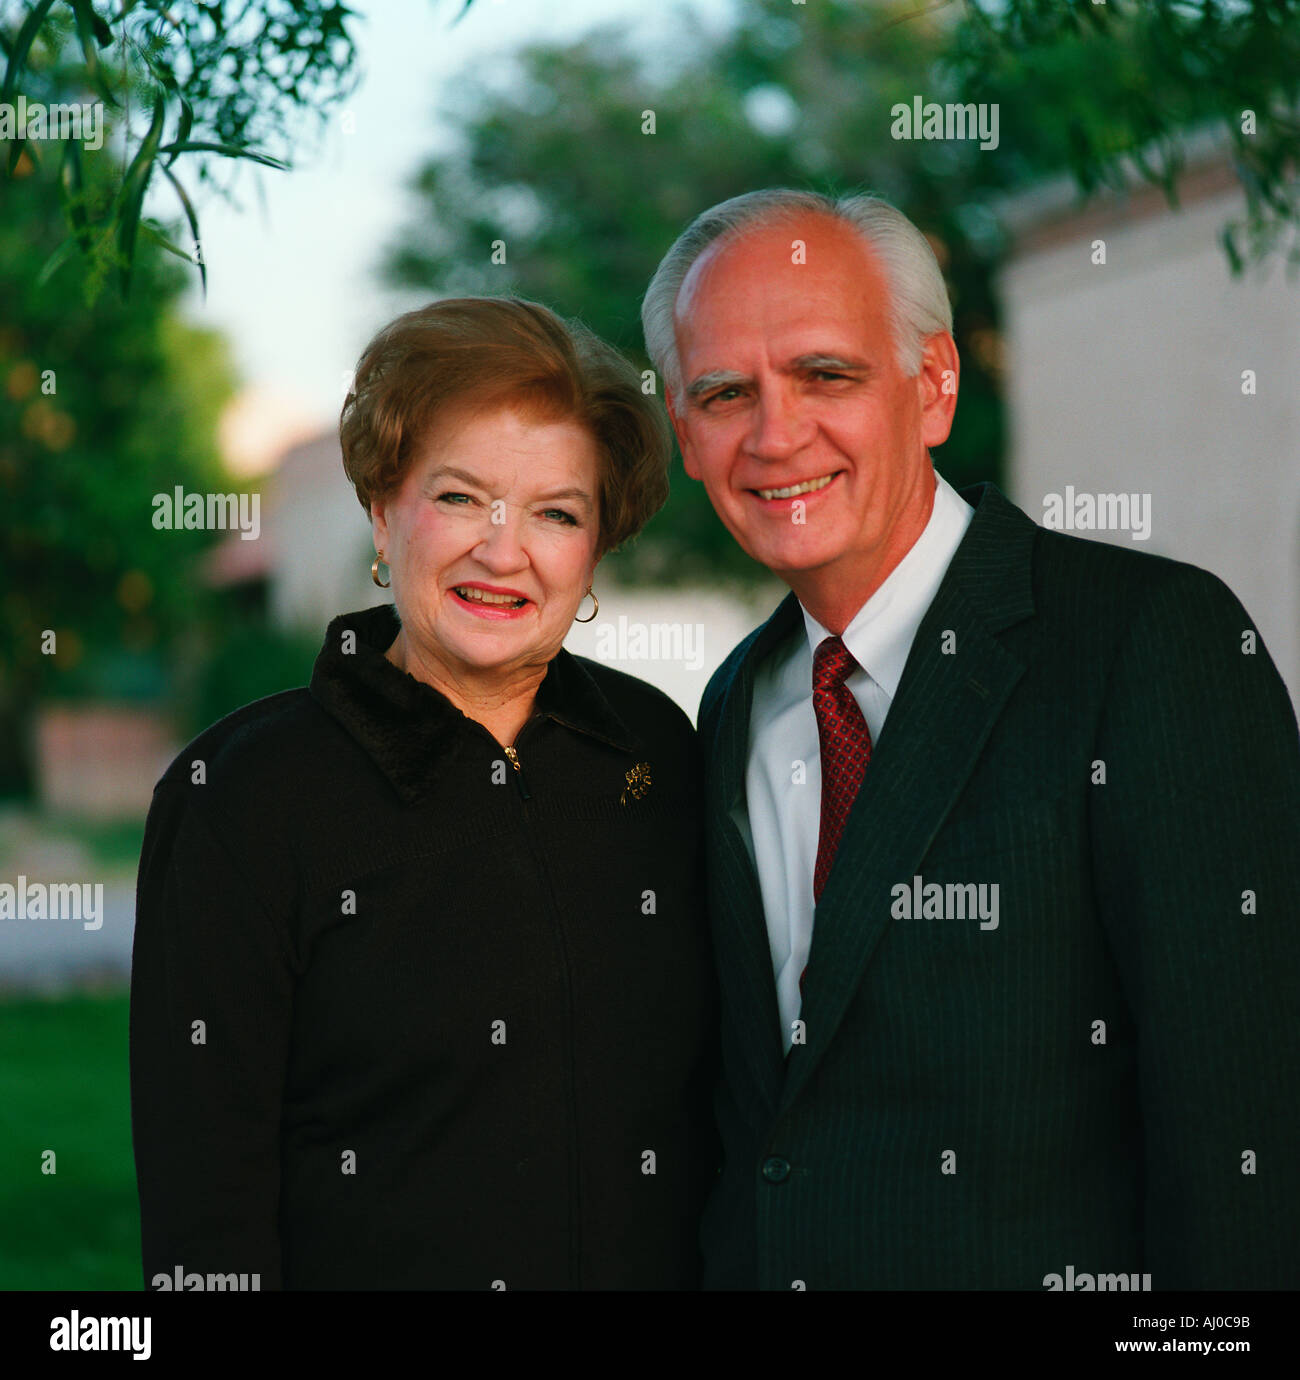 Portrait of a smiling senior couple standing together outdoors in dress clothes Stock Photo